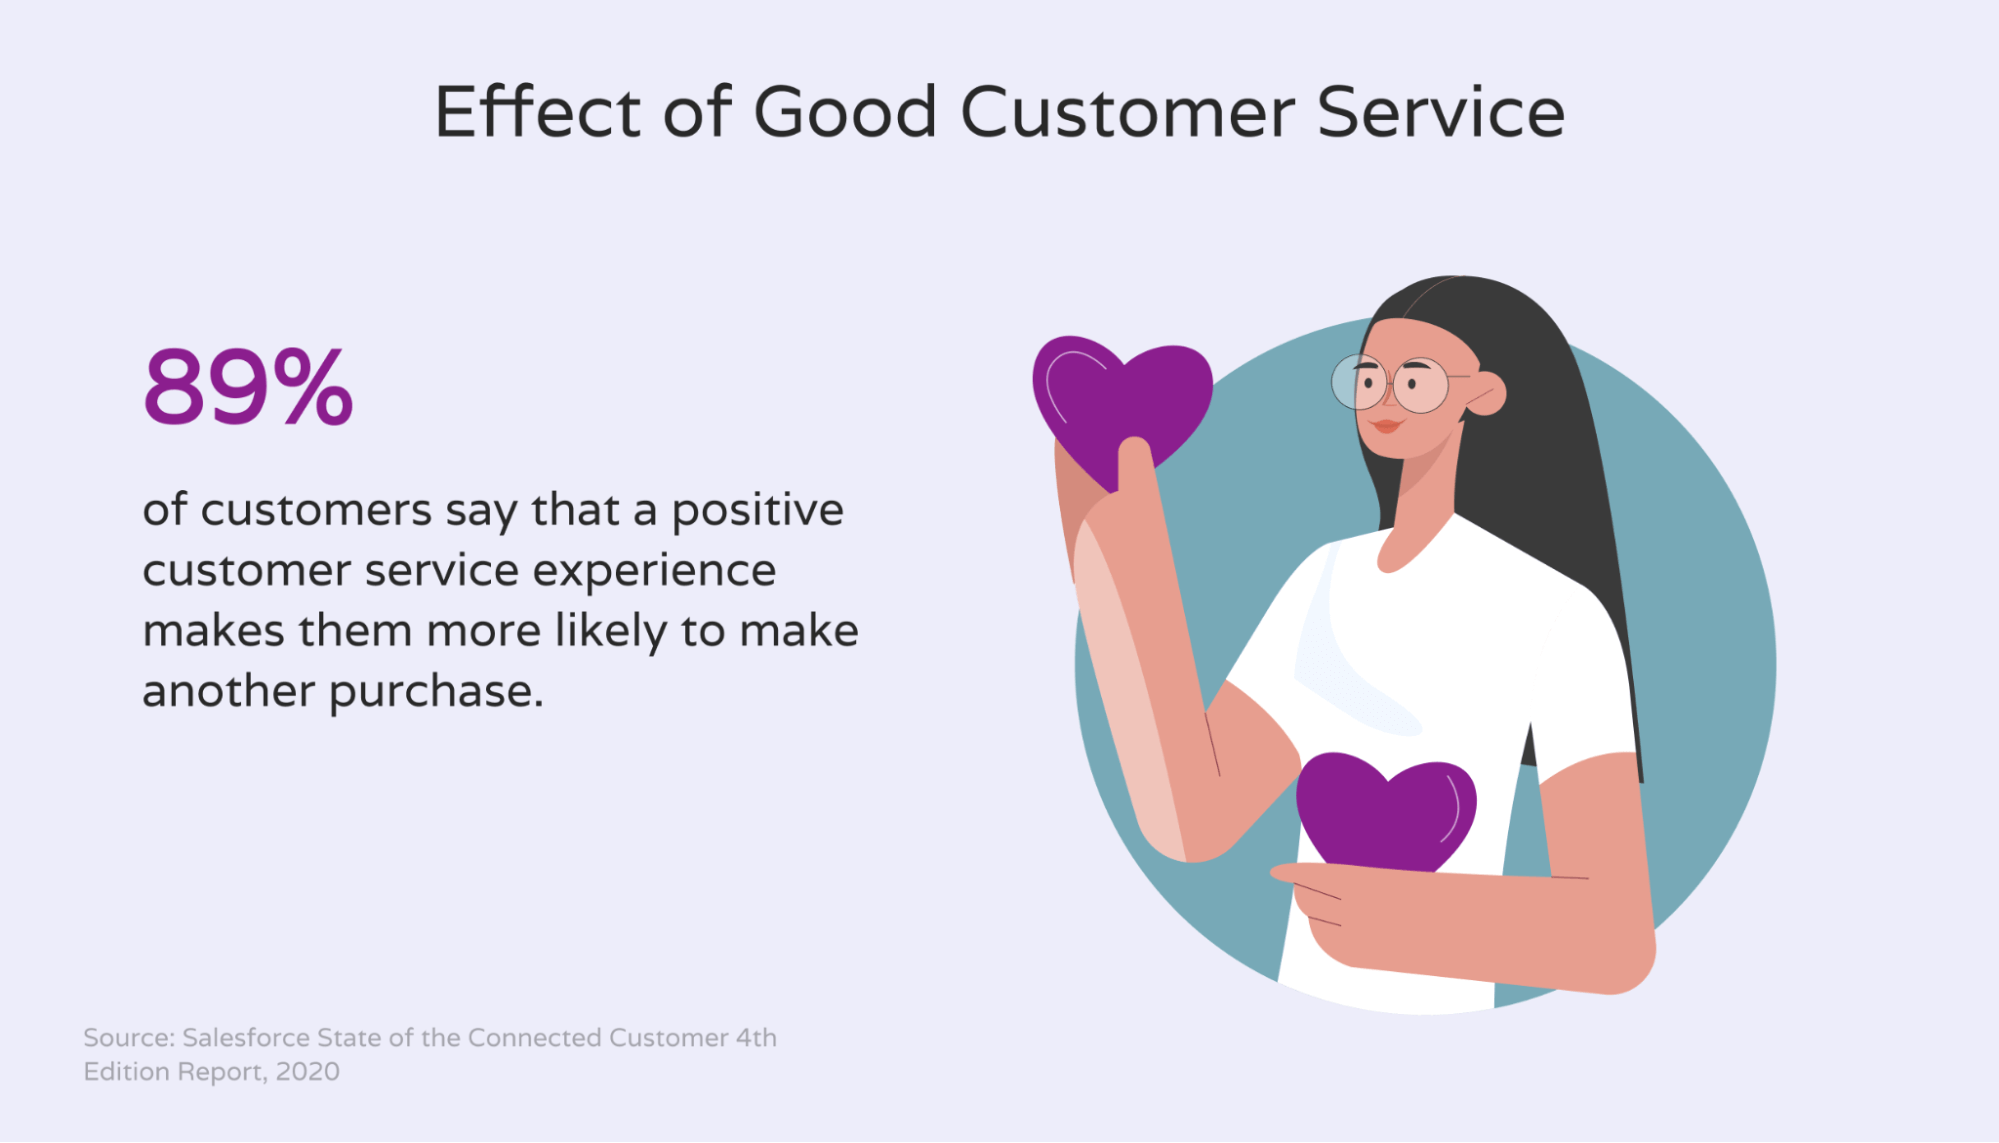 Percentage of customers who will do repeat business with a company due to good customer service